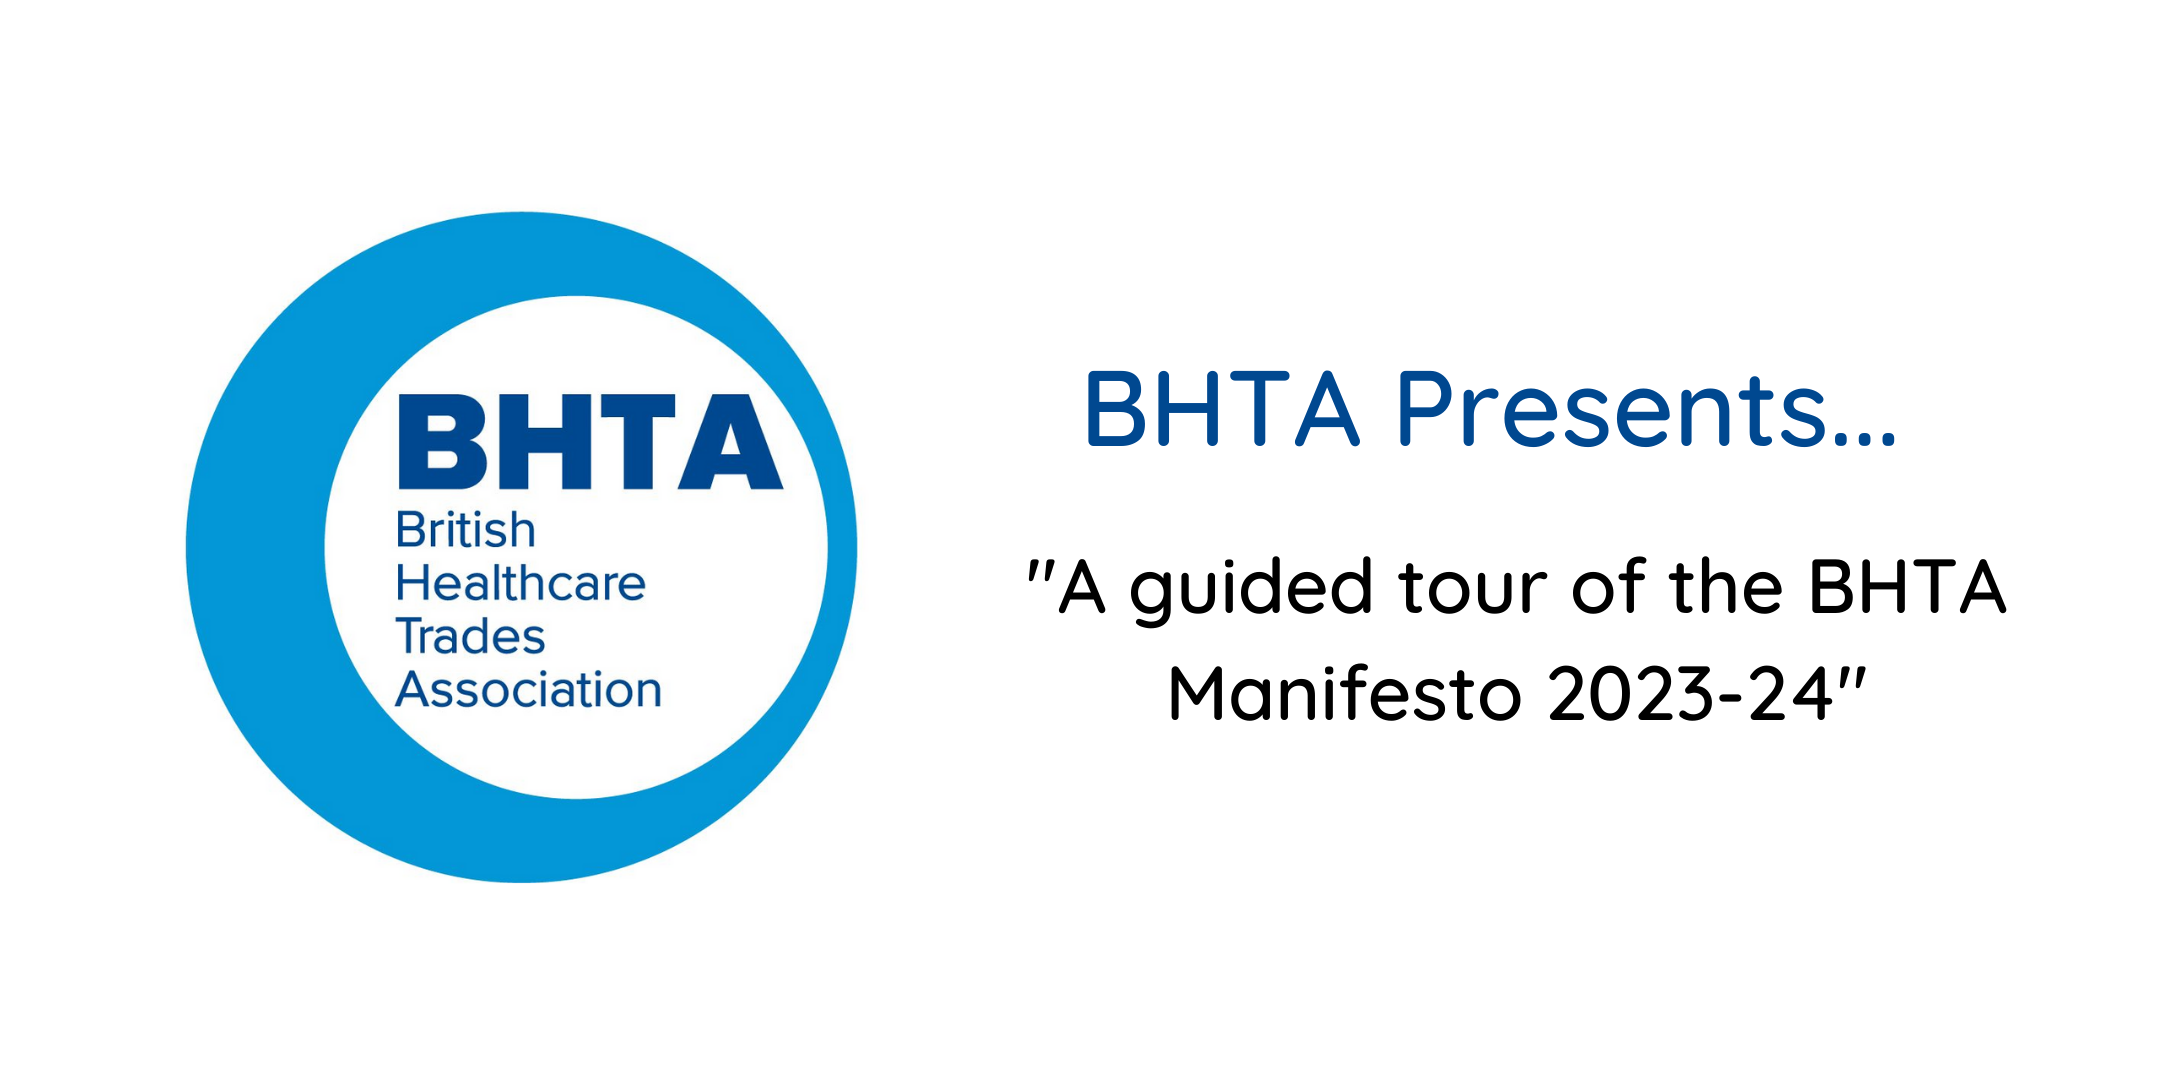 BHTA presents A guided tour of the BHTA Manifesto 2023-24